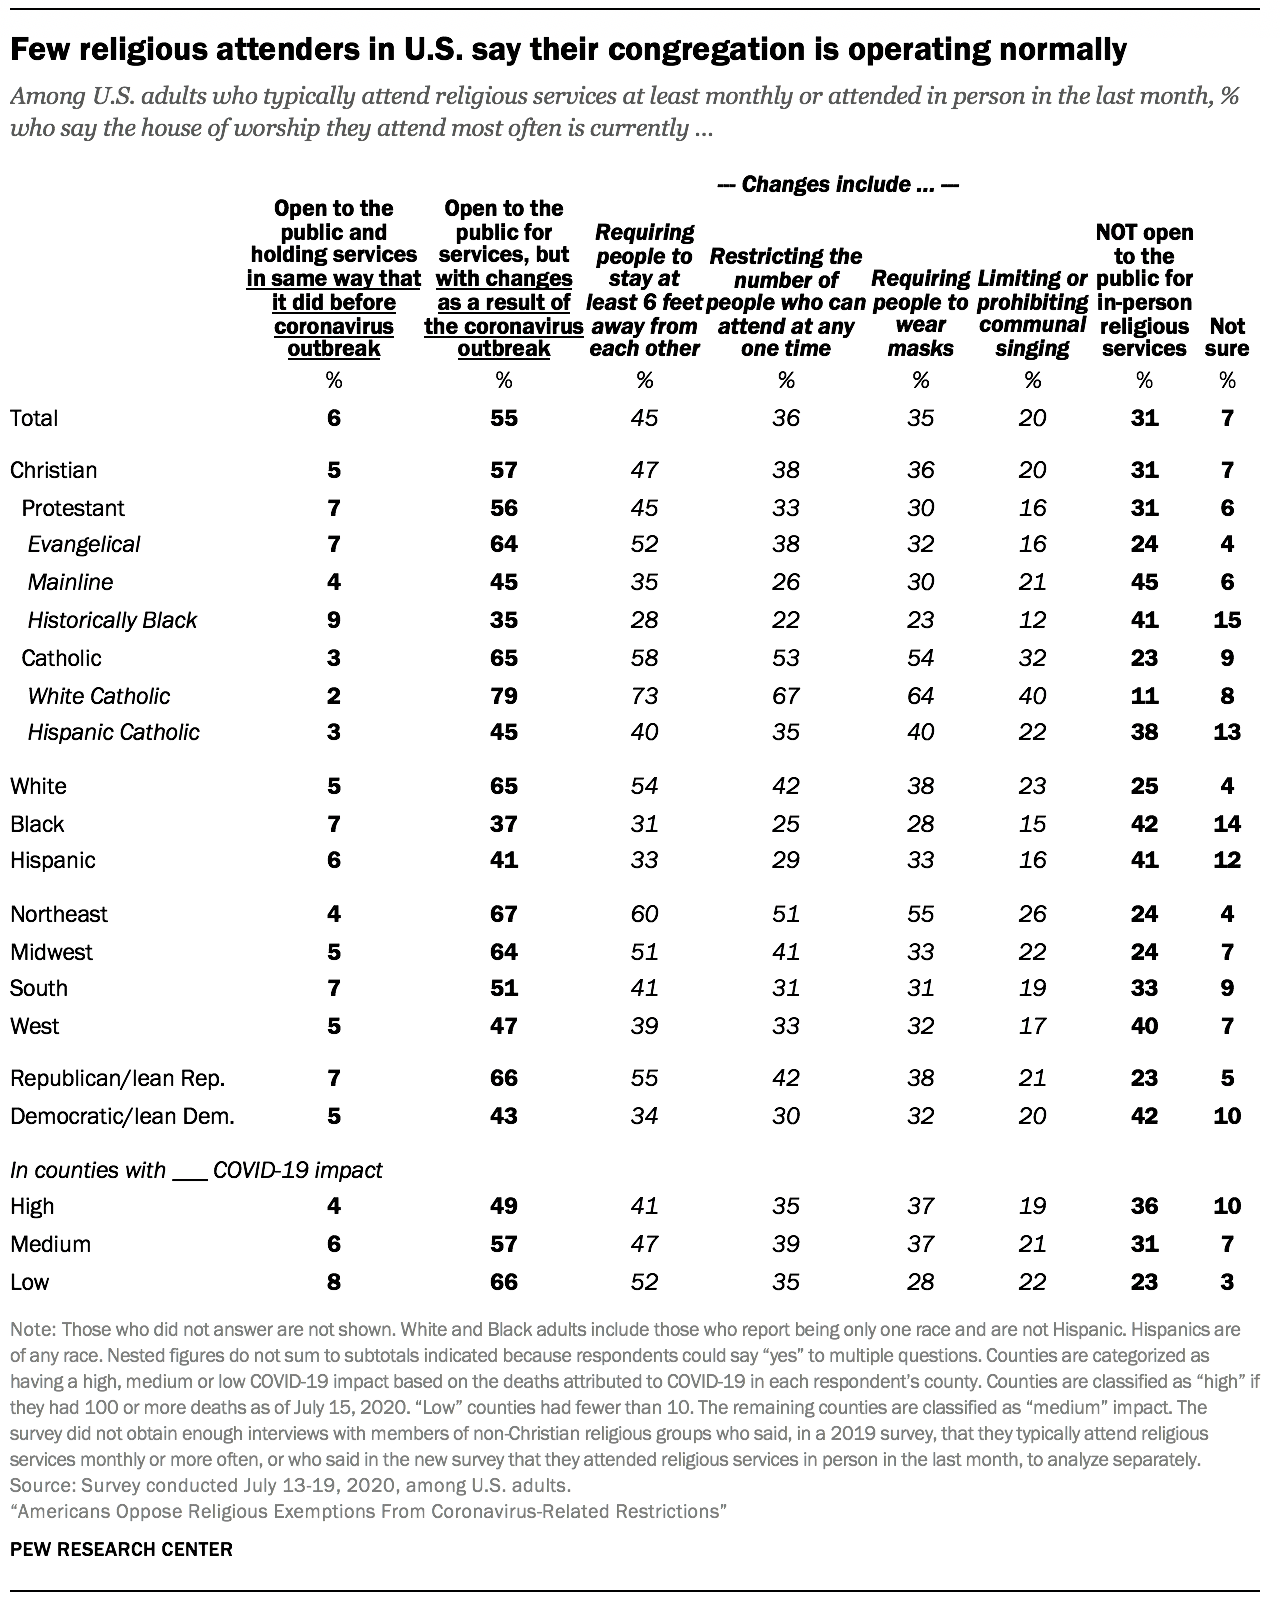 Few religious attenders in U.S. say their congregation is operating normally